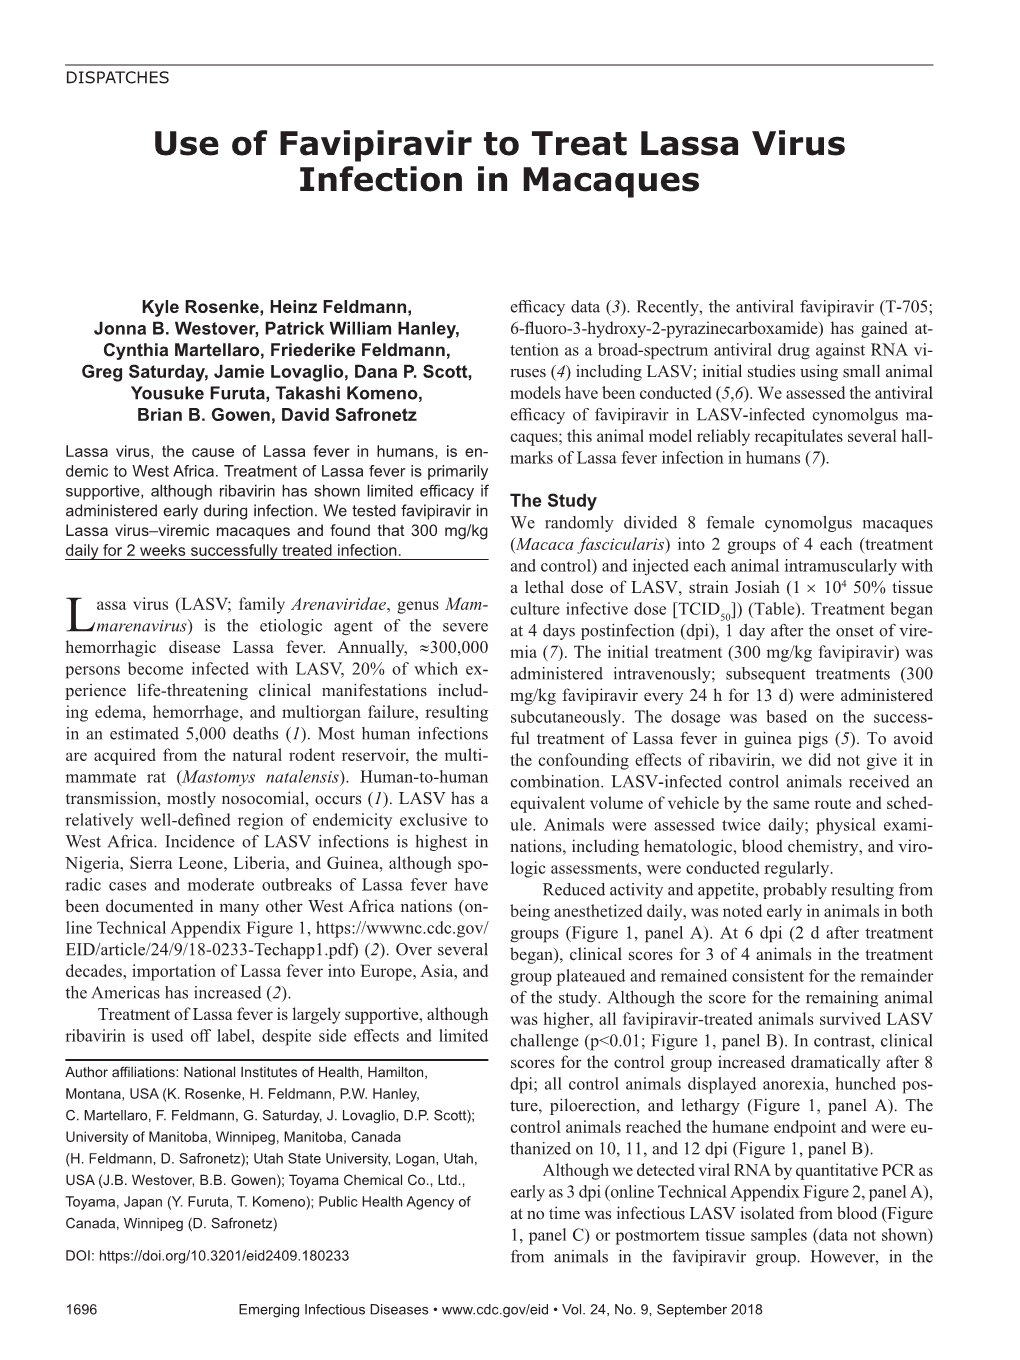 Use of Favipiravir to Treat Lassa Virus Infection in Macaques